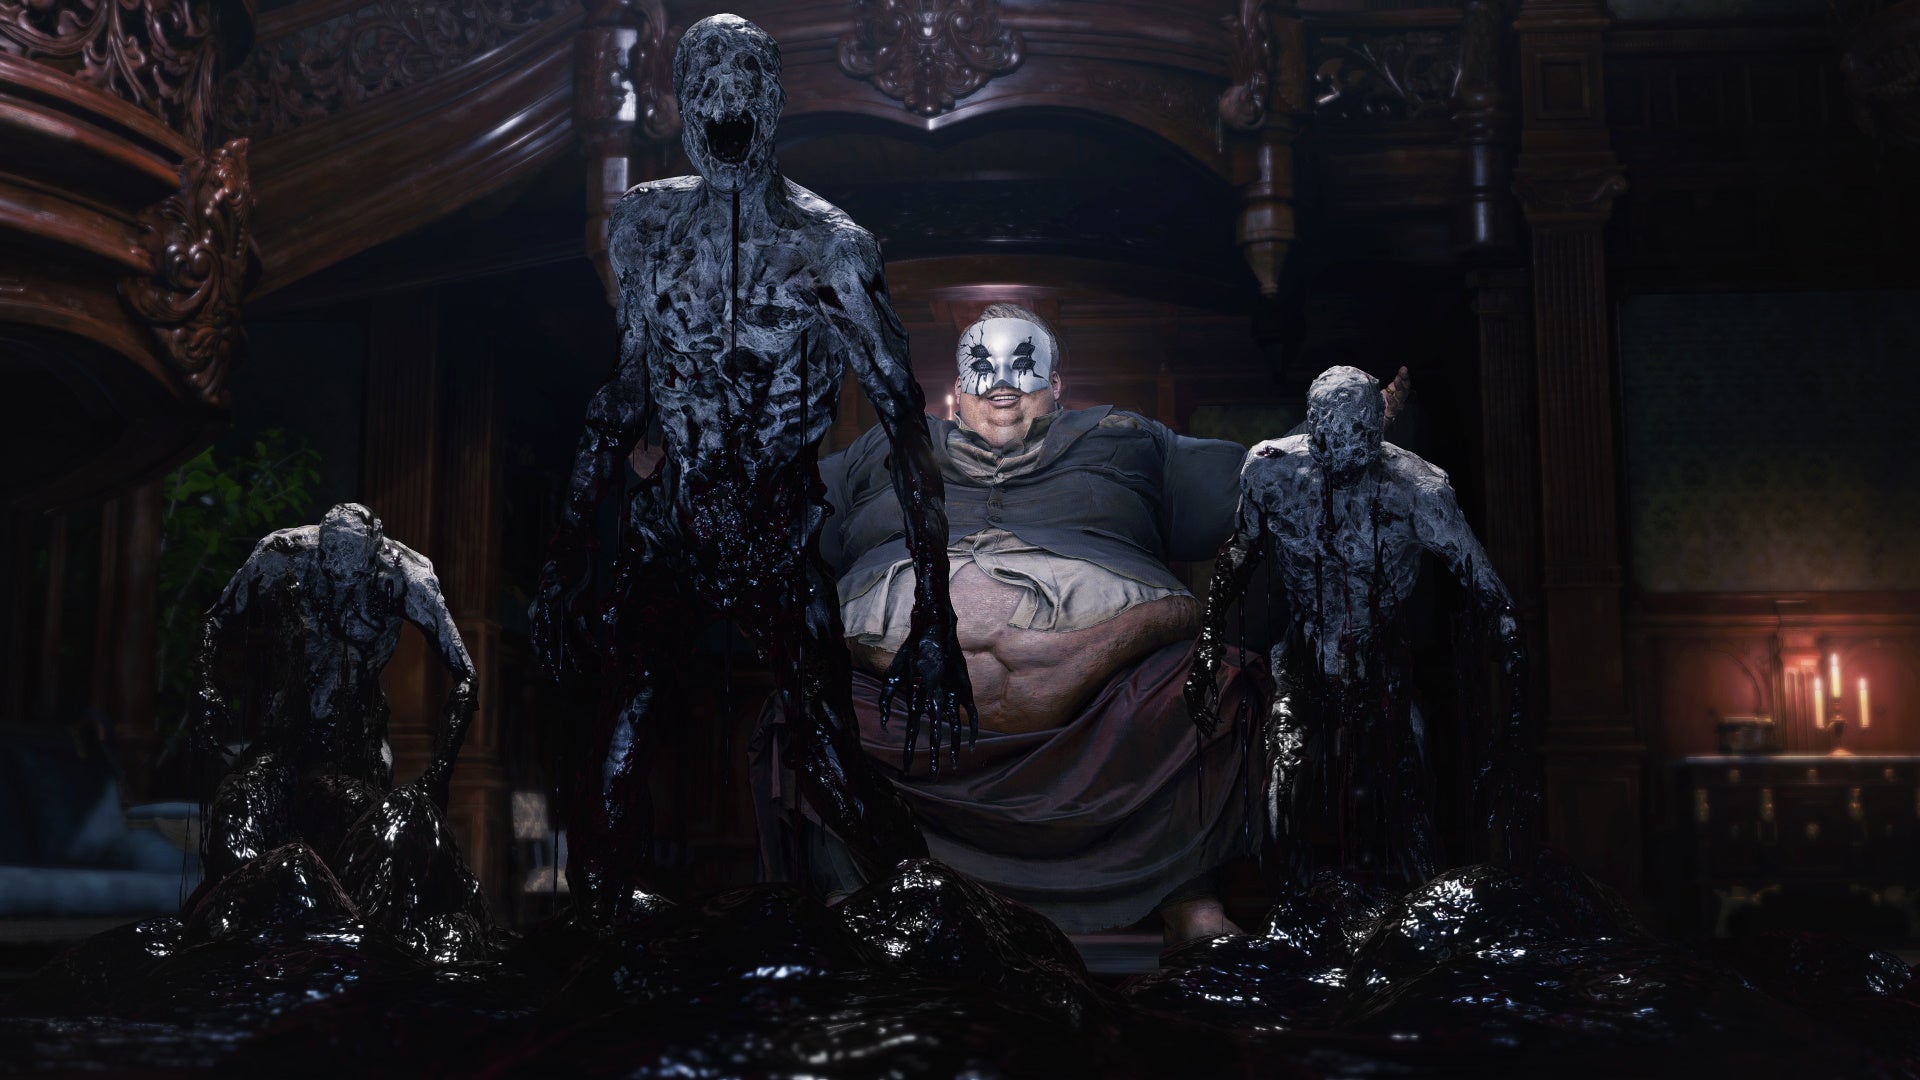 Three ashen zombies rise up out of red gore, while the masked Baron sits smiling behind them in Resident Evil Village's Shadows Of Rose DLC